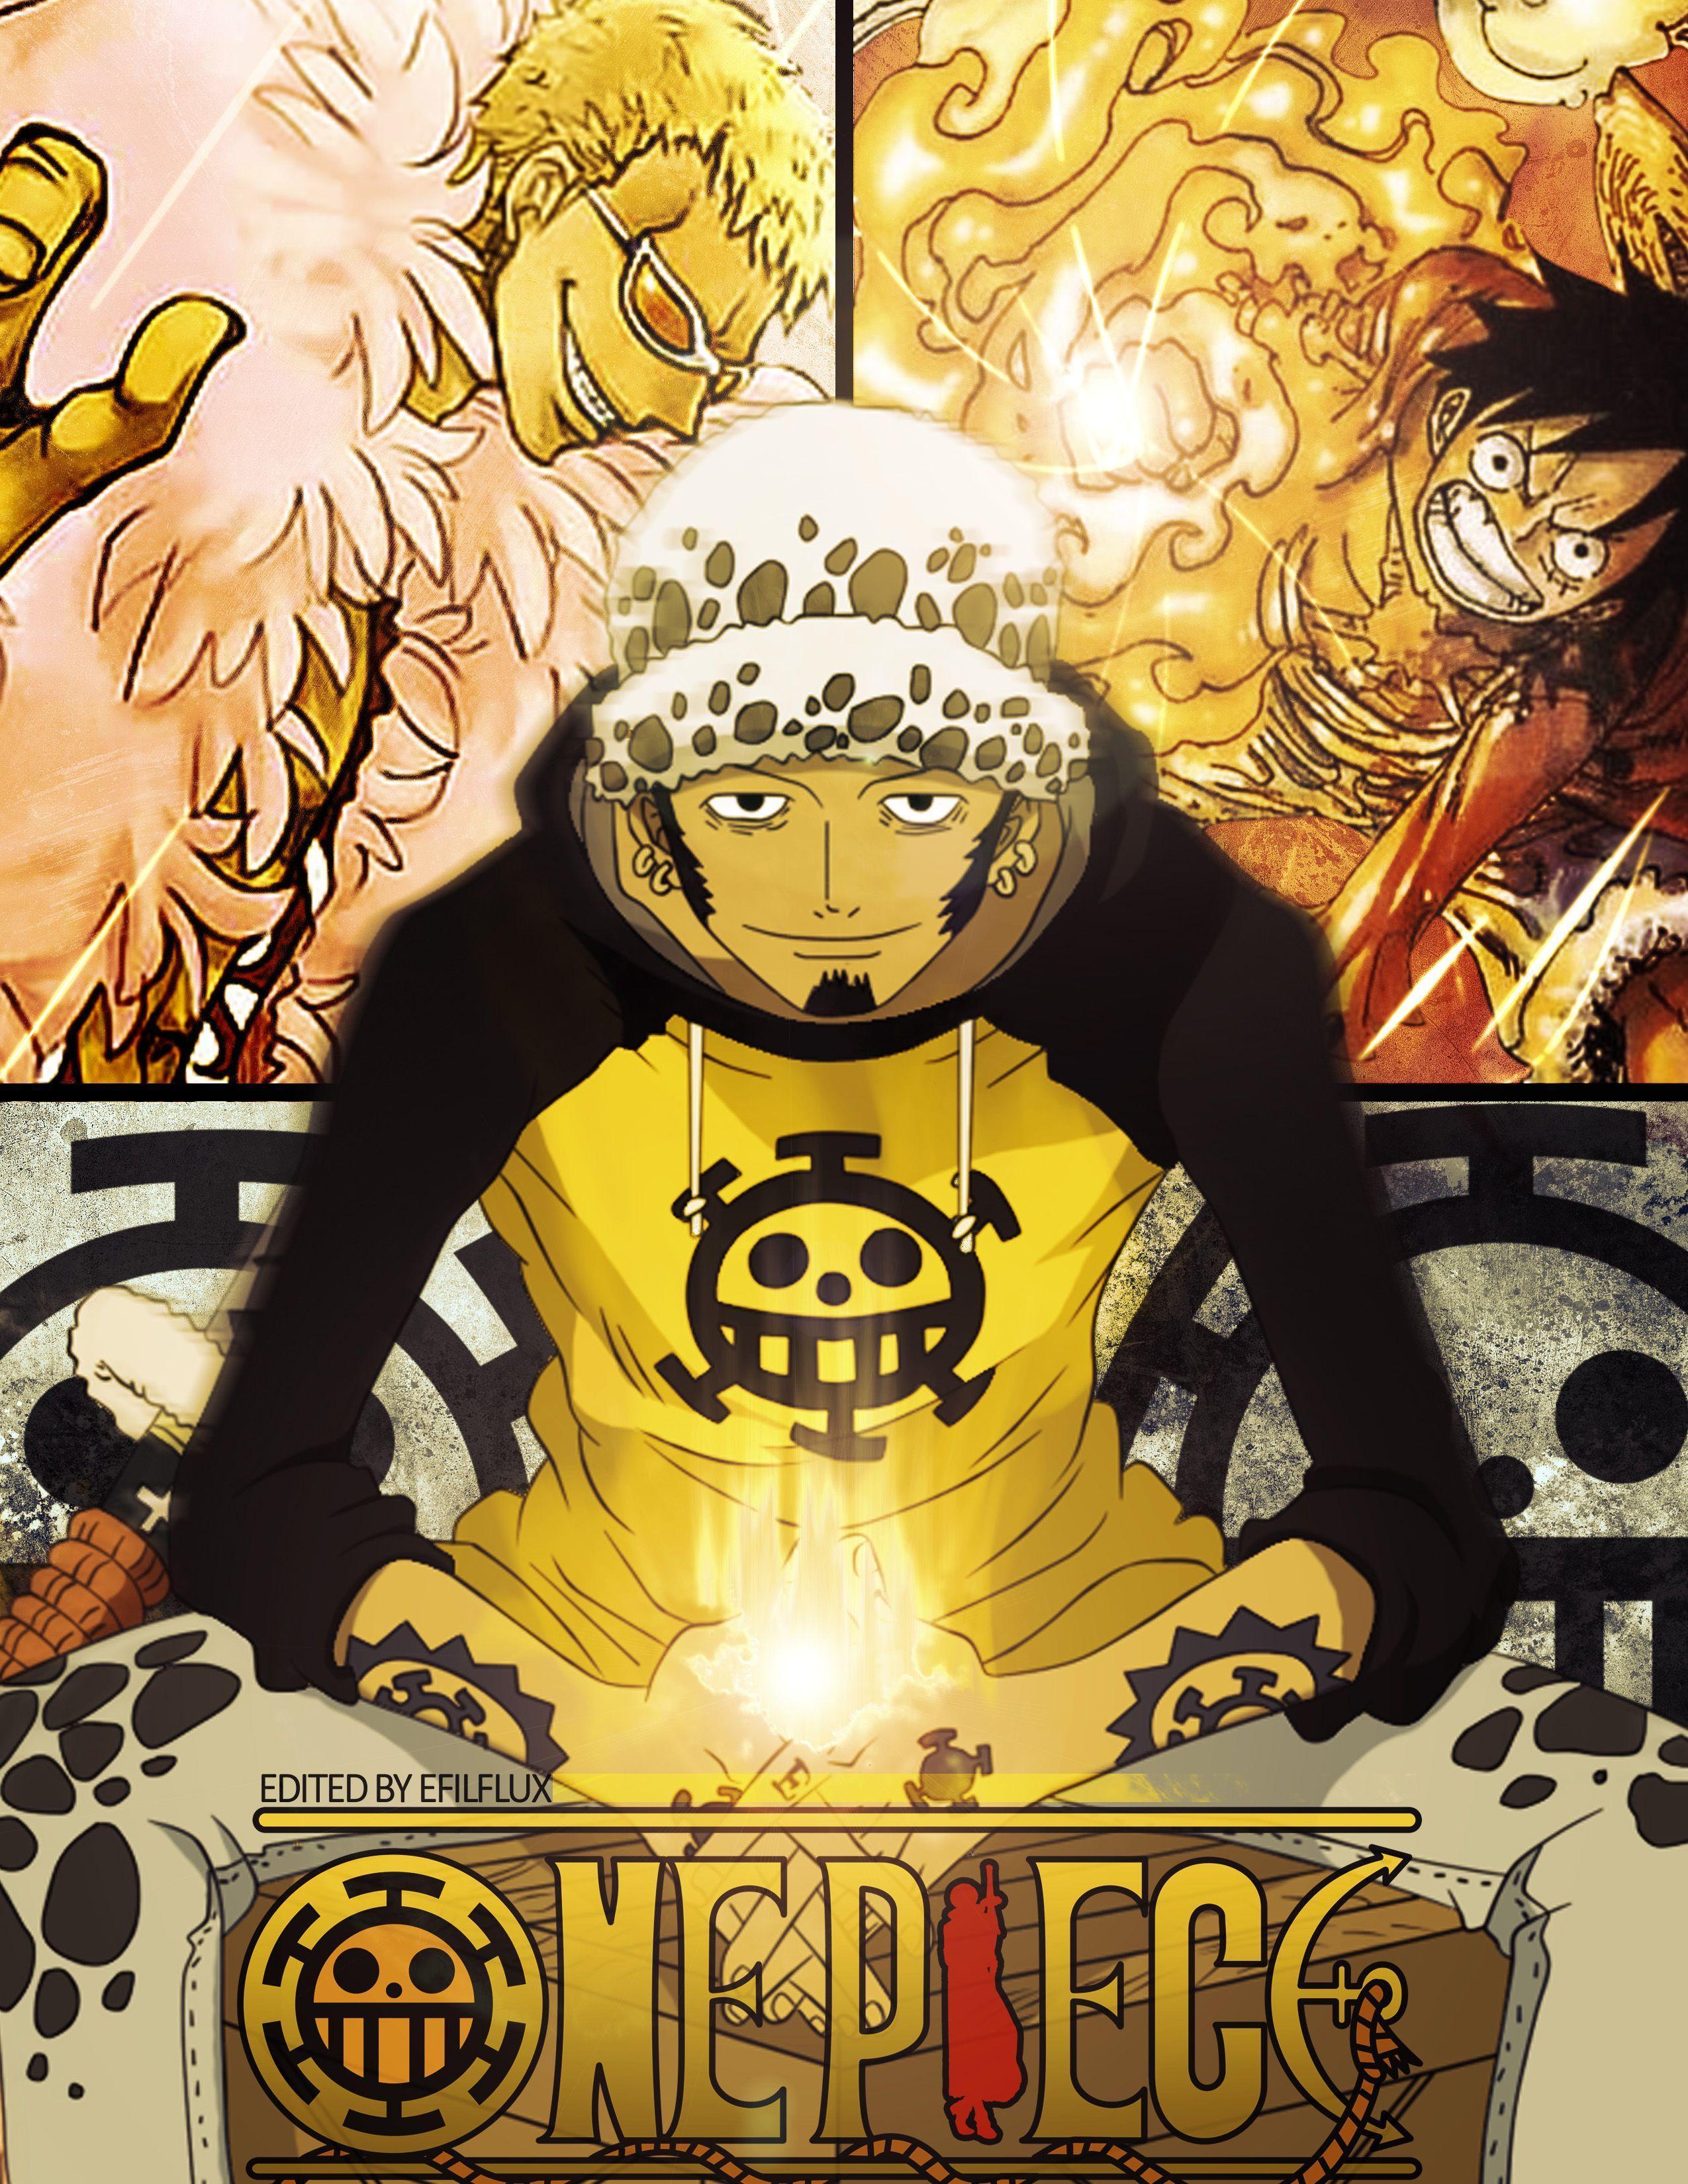 Trafalgar Law From One Piece Wallpaper, HD Anime 4K Wallpapers, Images and  Background - Wallpapers Den